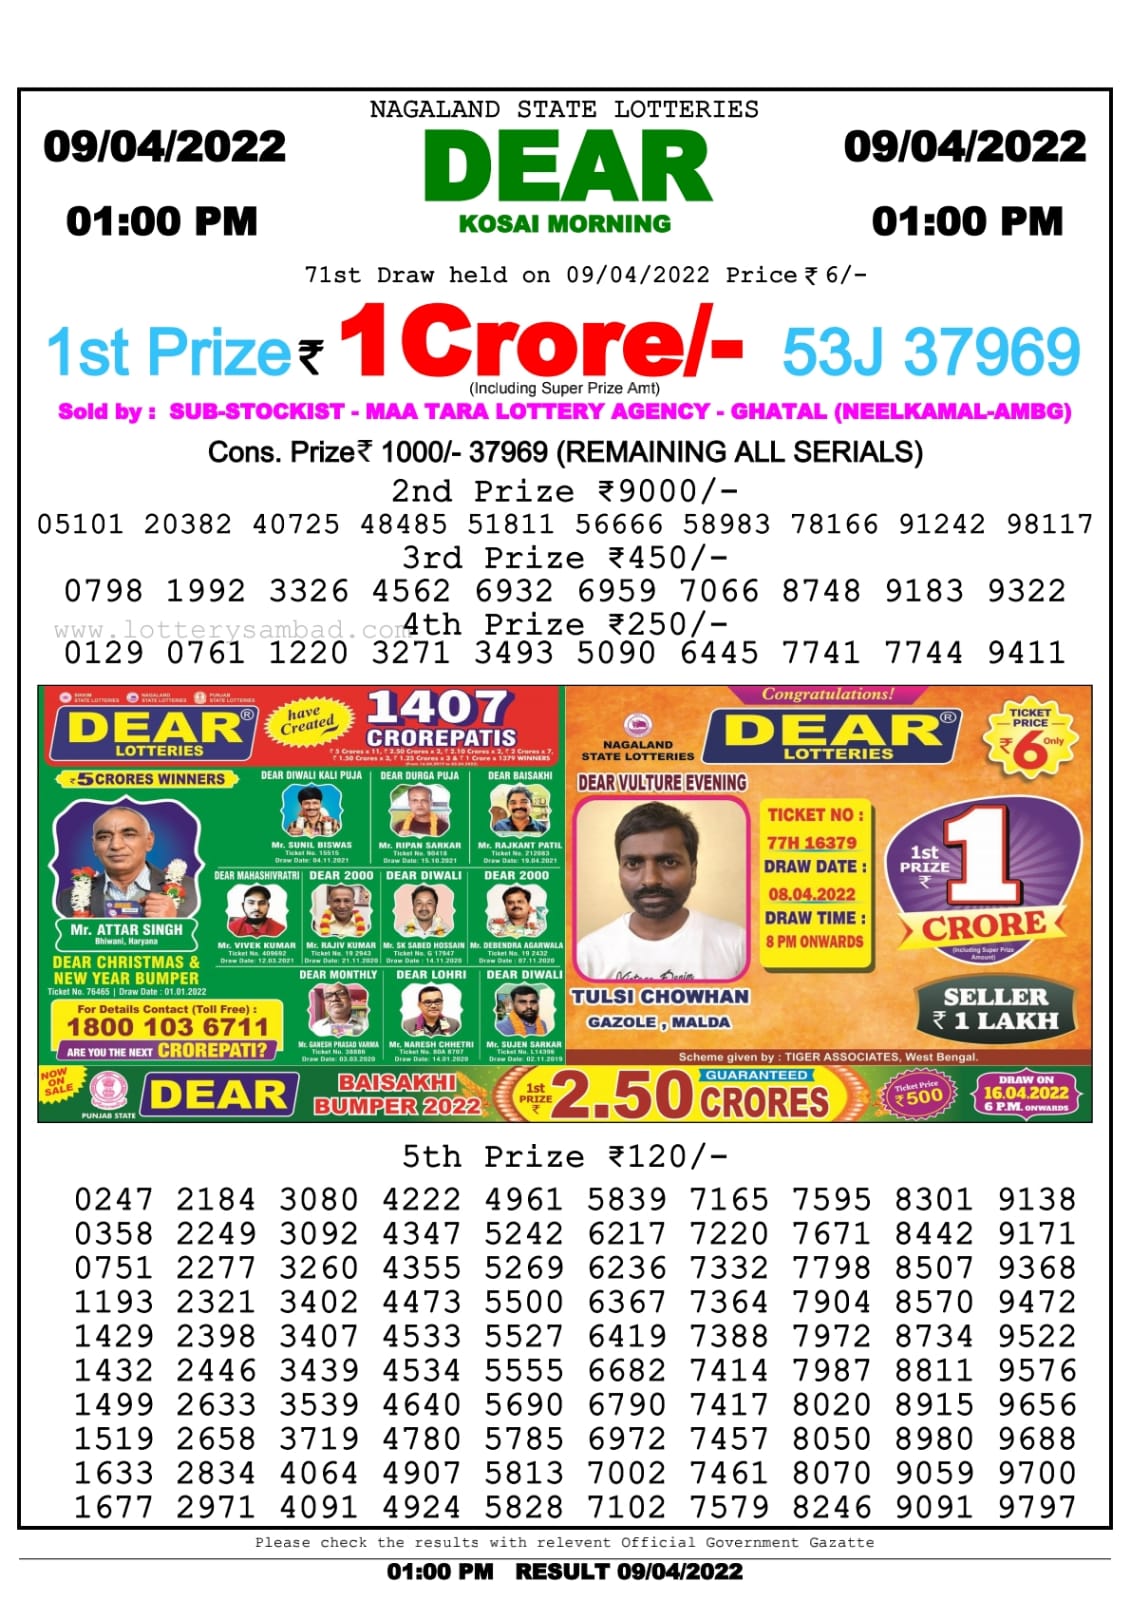 Dear Lottery Nagaland state Lottery Results 01.00 pm 09.04.2022